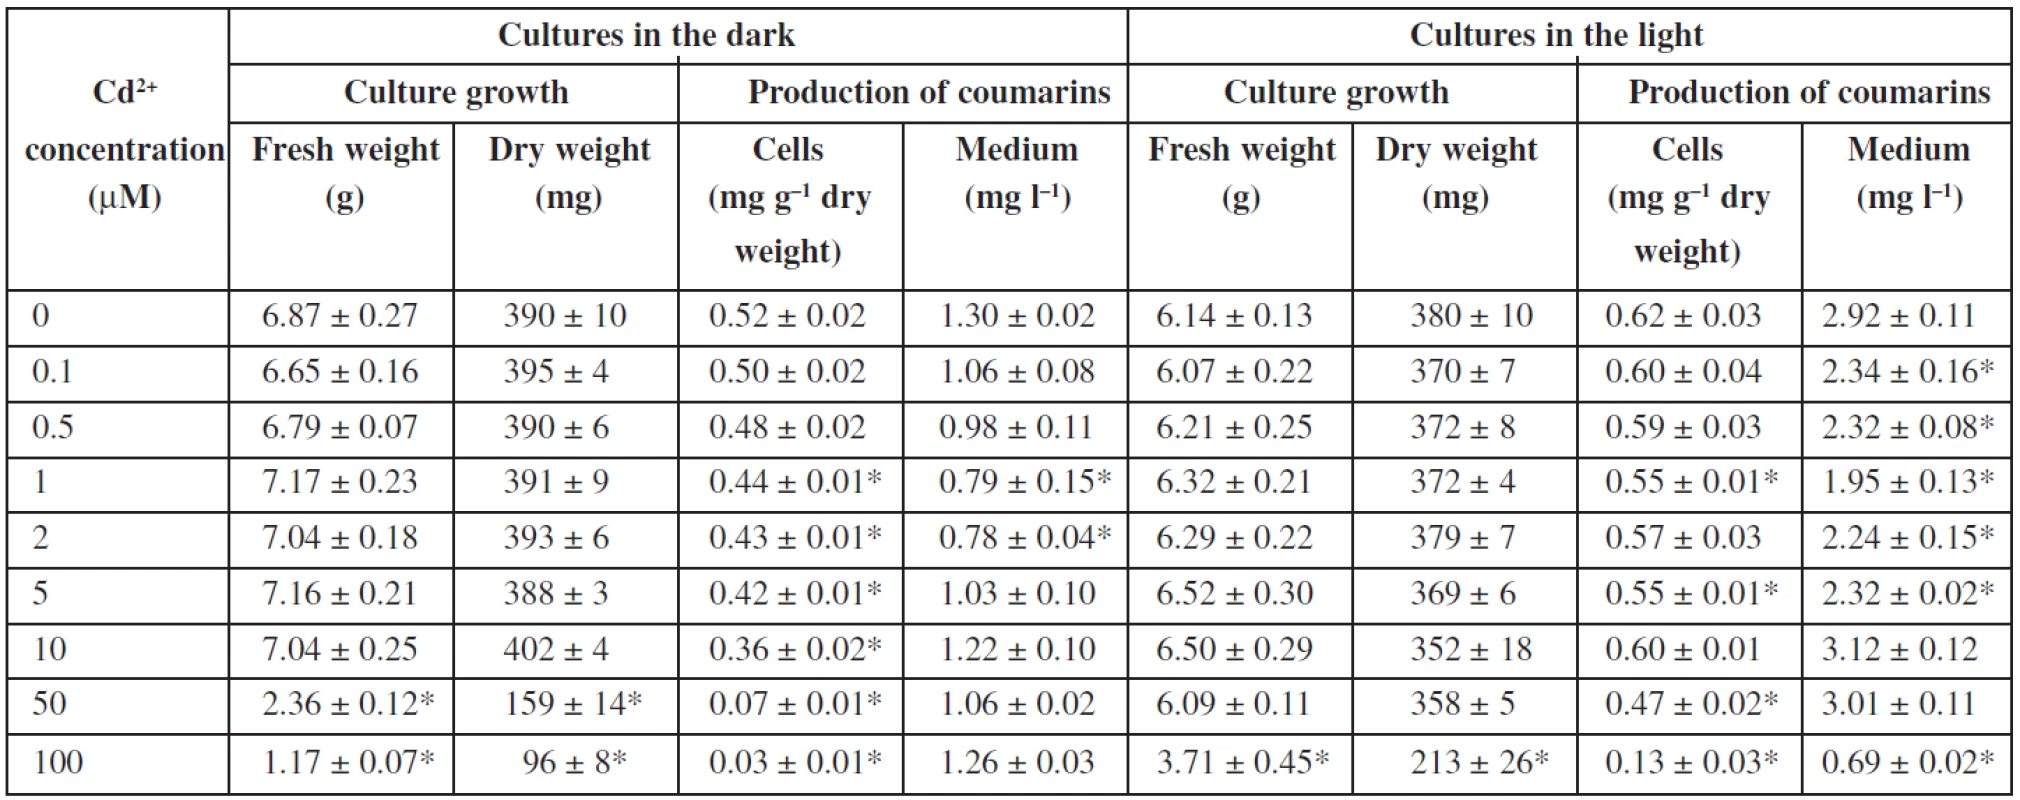 Effects of cadmium ions on cell growth and production of coumarins in Angelica archangelica cell suspension cultures. Values are means ± standard deviations (n = 3). Asterisks denote significant differences between control (without Cd&lt;sup&gt;2+&lt;/sup&gt;) and Cd-treated cultures, P &lt; 0.05.